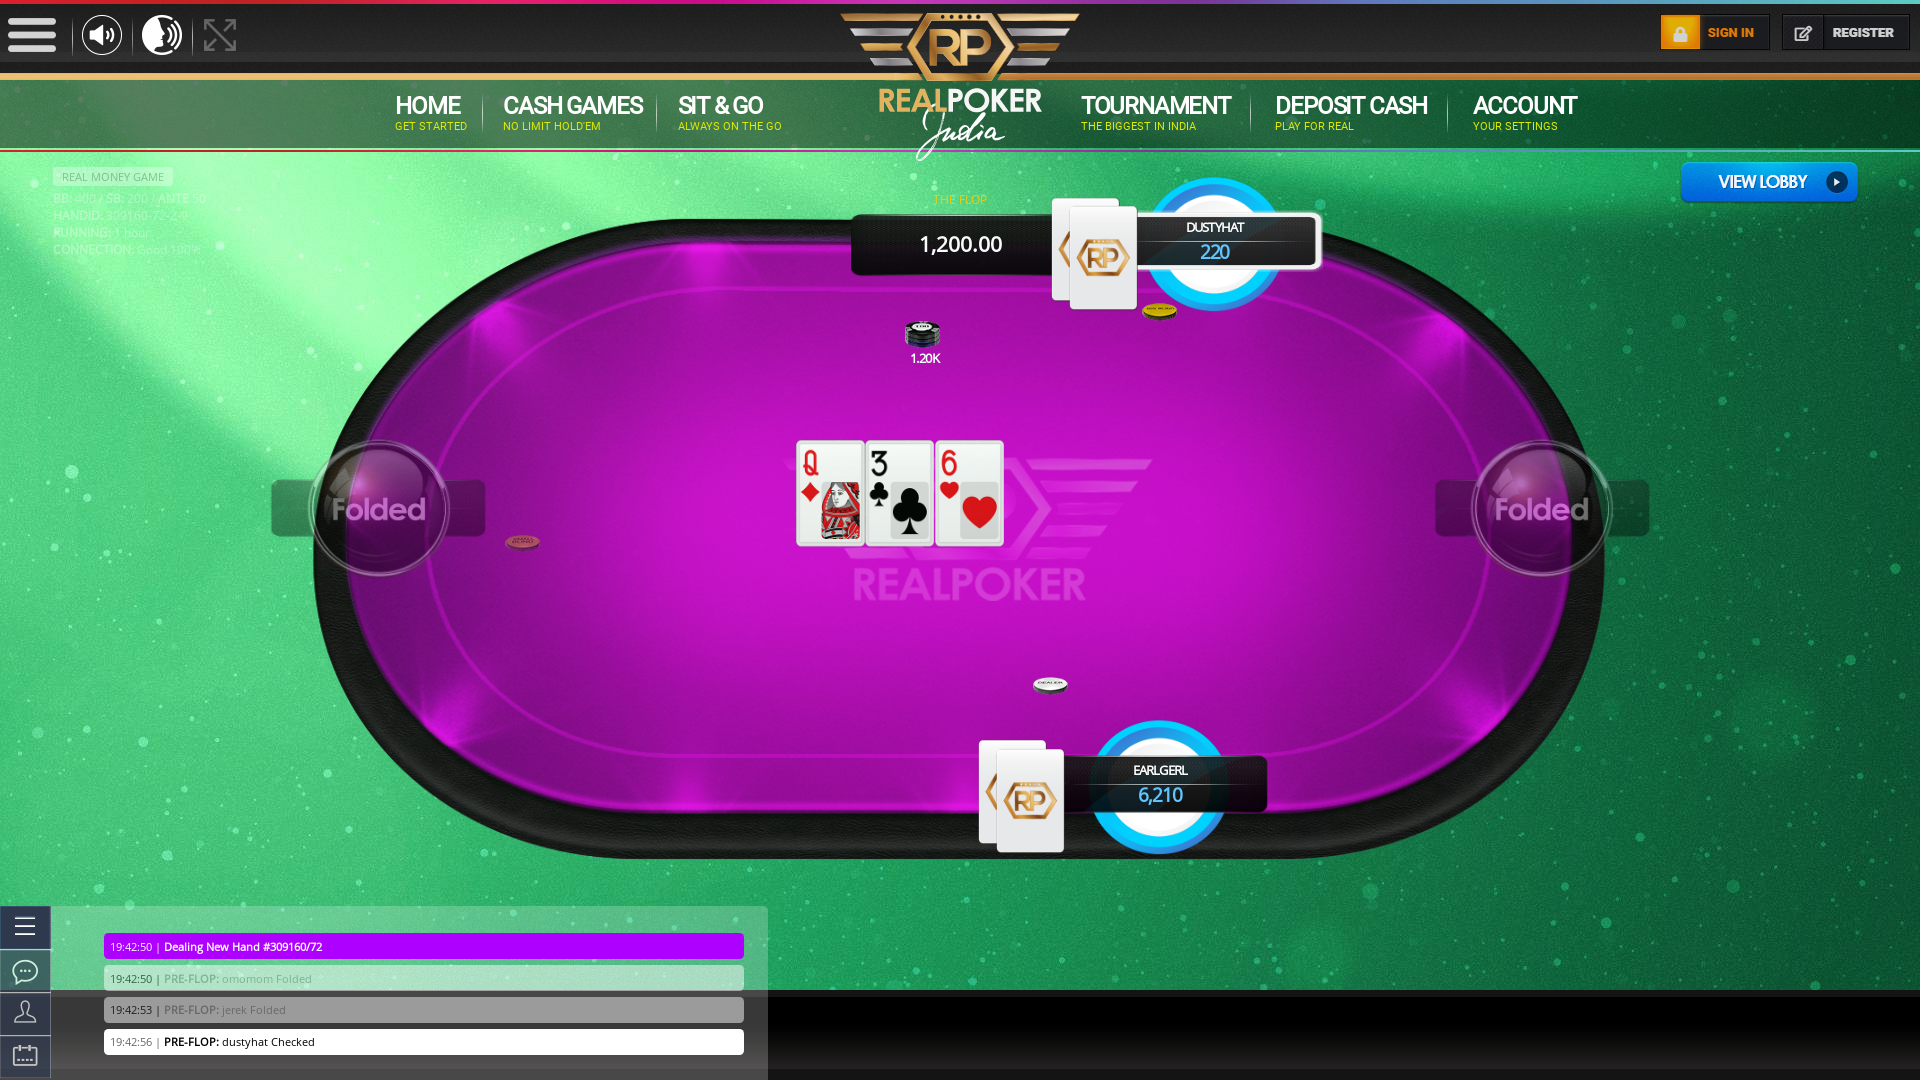 Indian poker on a 10 player table in the 60th minute